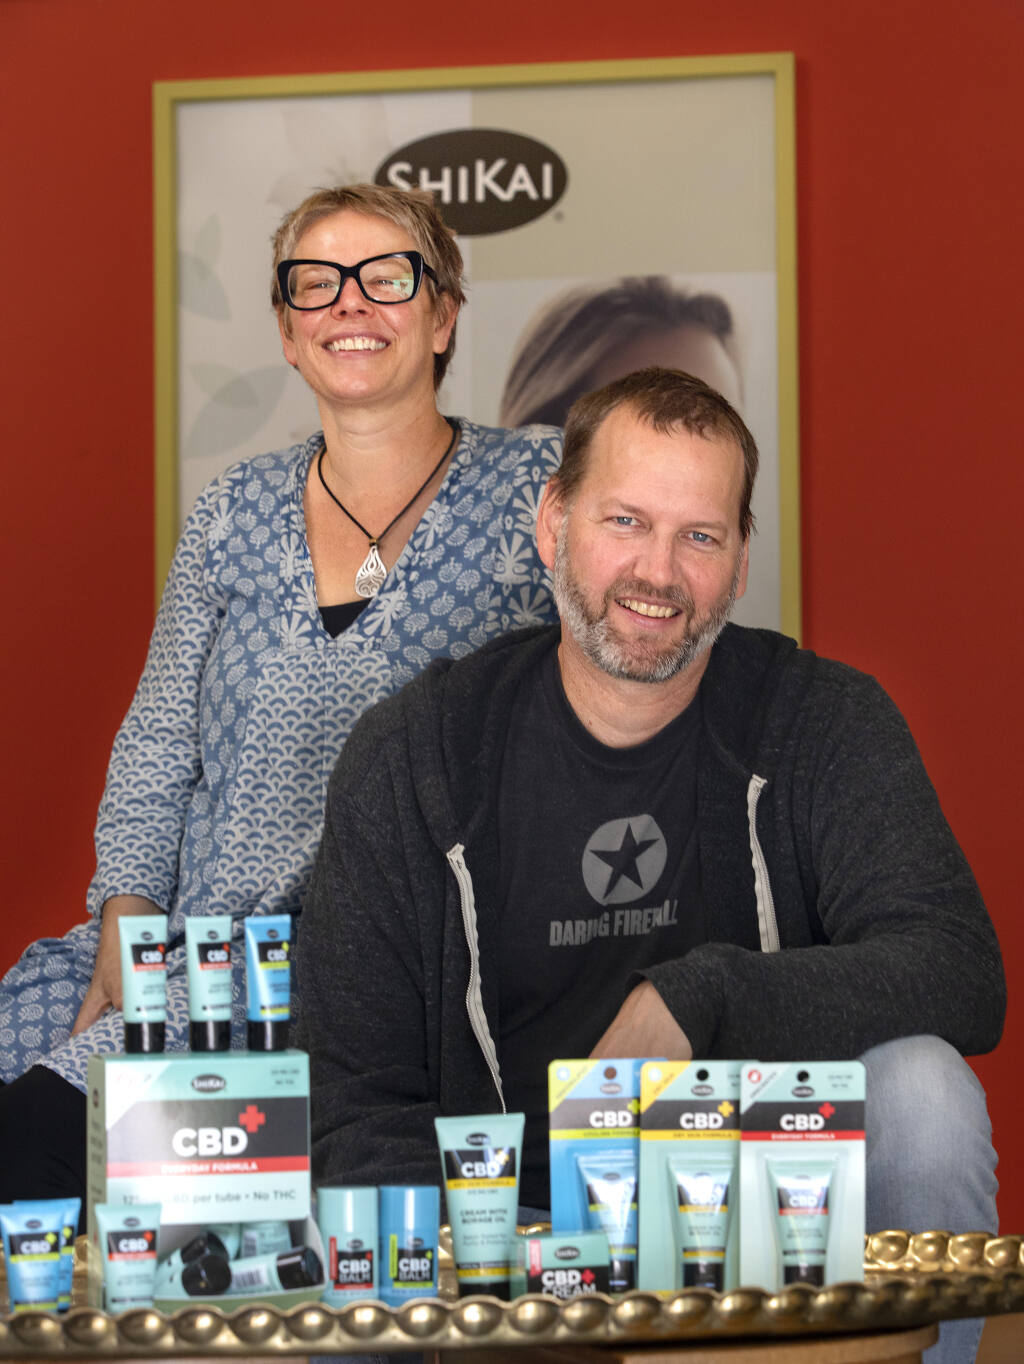 ShiKai President Jason Sepp and his sister and VP, Hilary Sepp, continue innovating the company their father started five years ago with a line of CBD topical balms and creams. Photo taken on Aug. 26, 2020. (John Burgess / The Press Democrat)